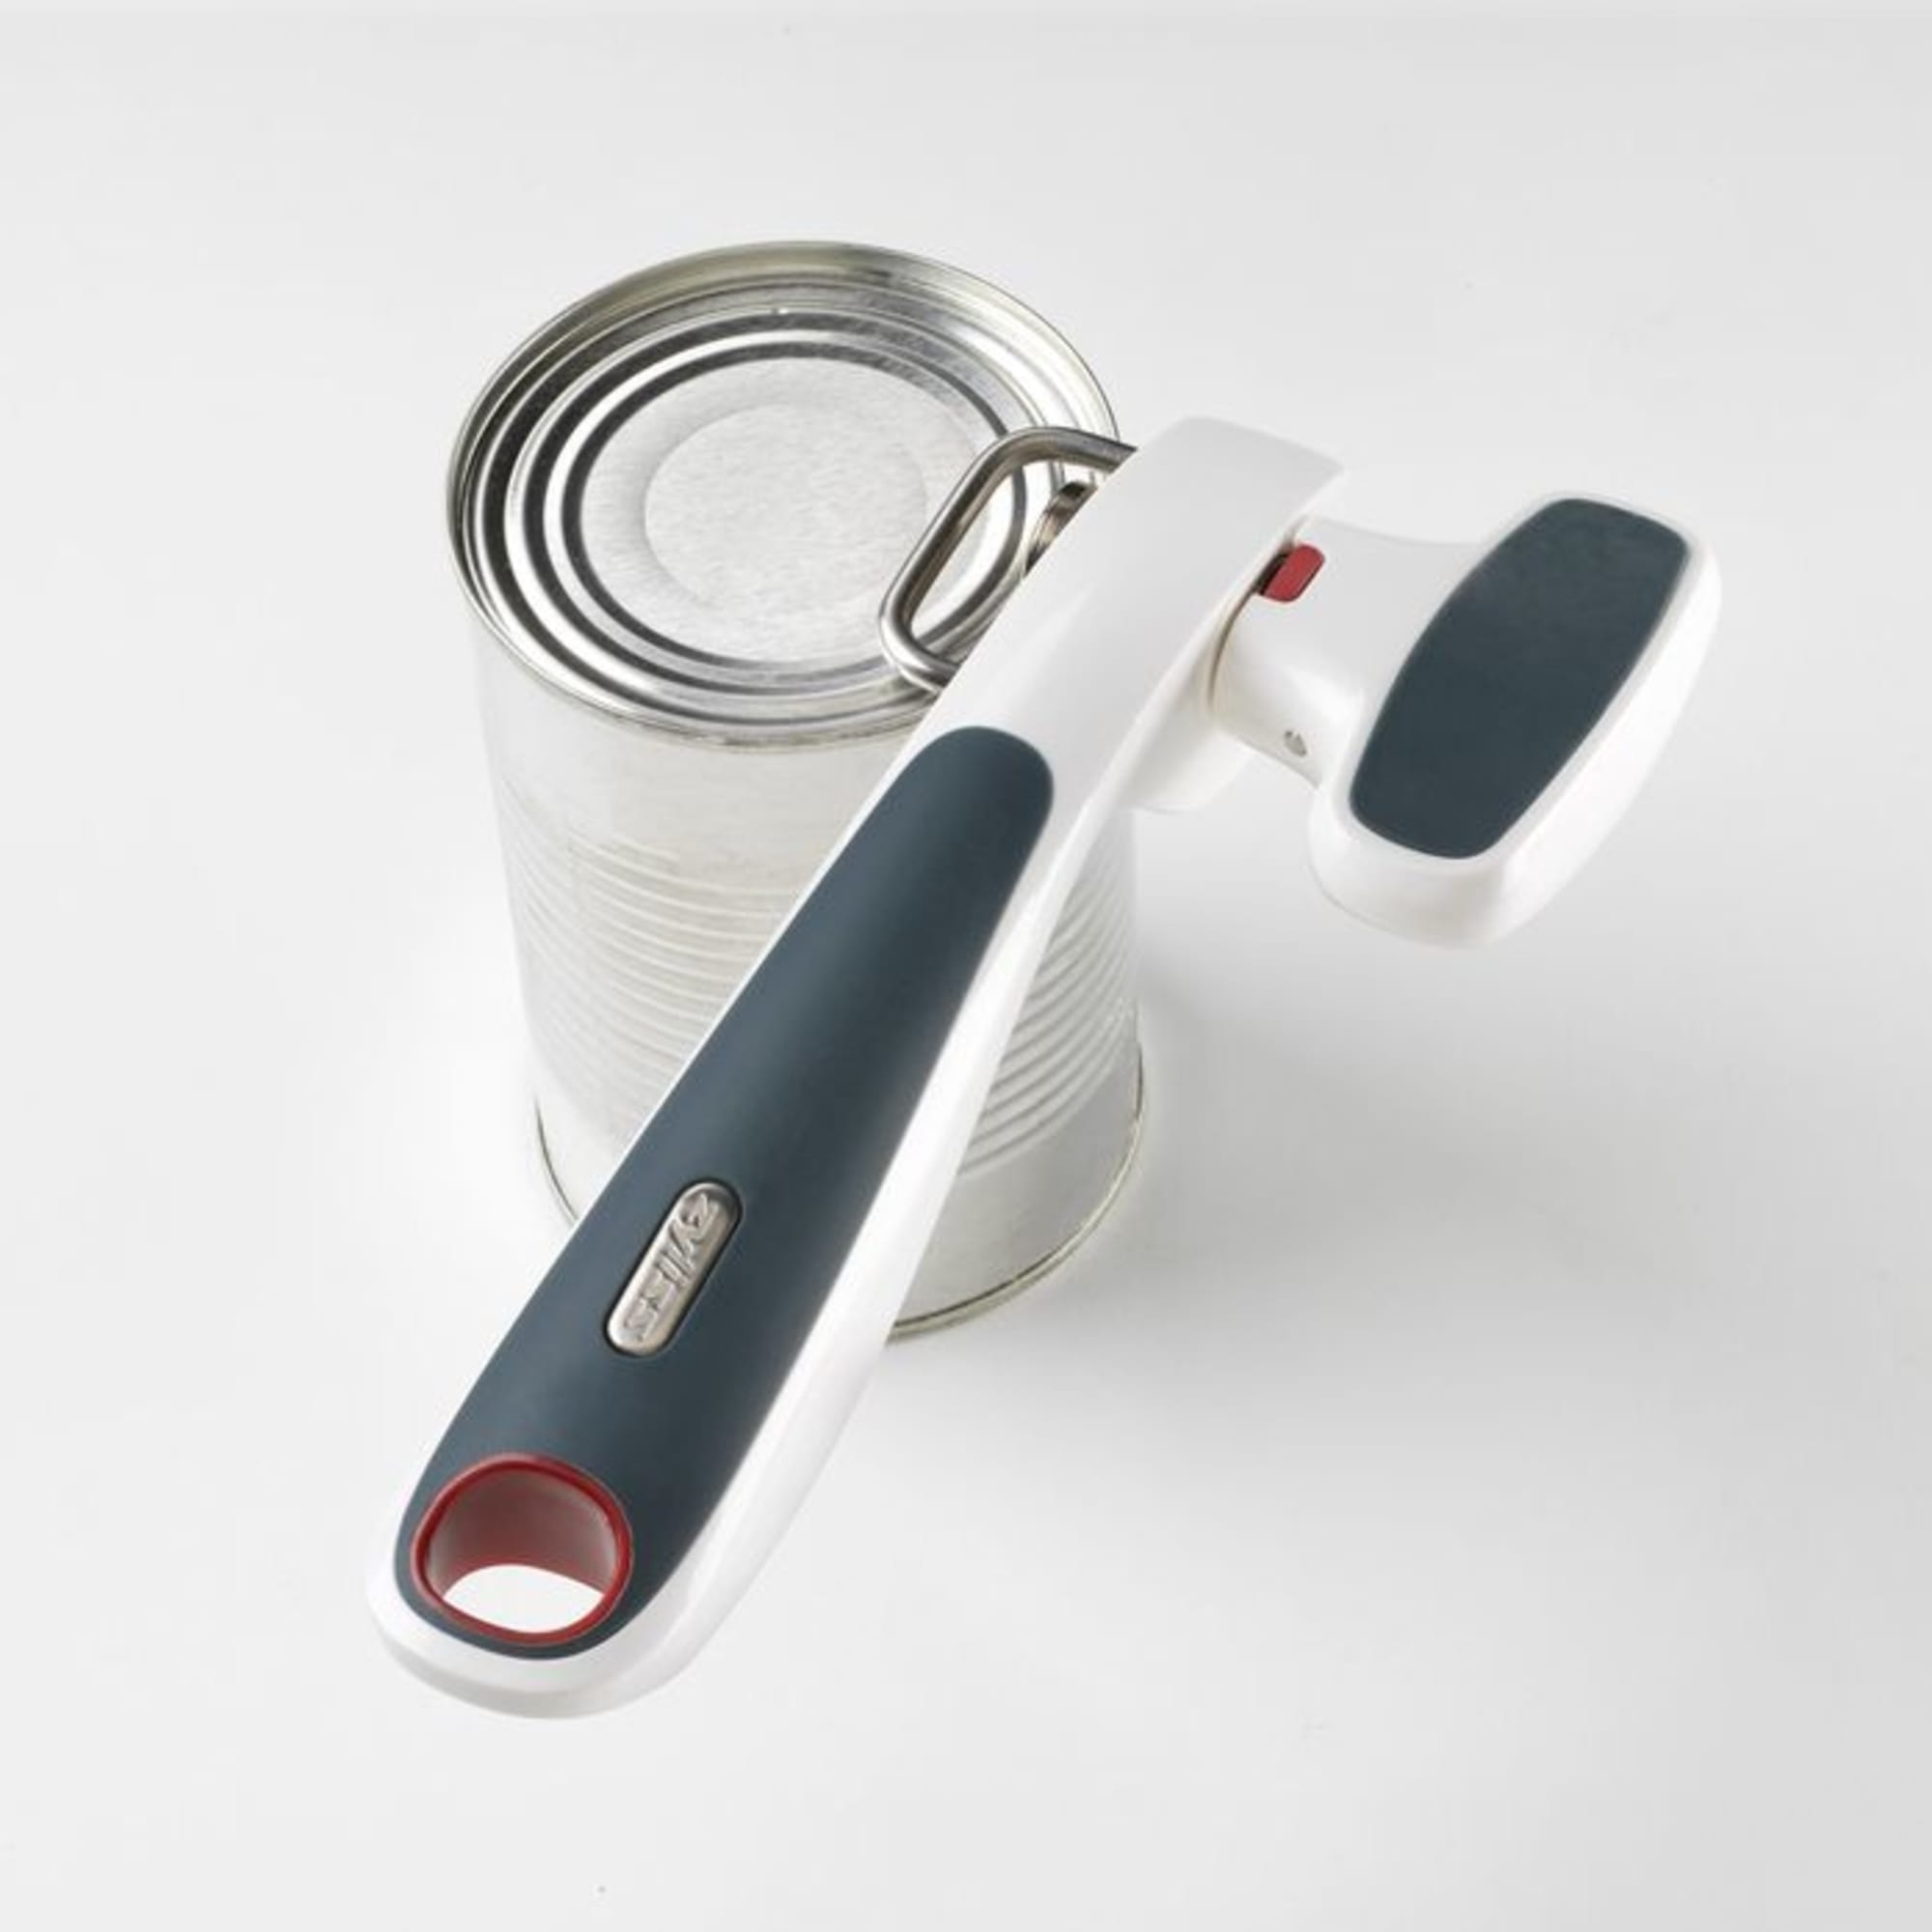 Zyliss Safe Edge Can Opener Image 2